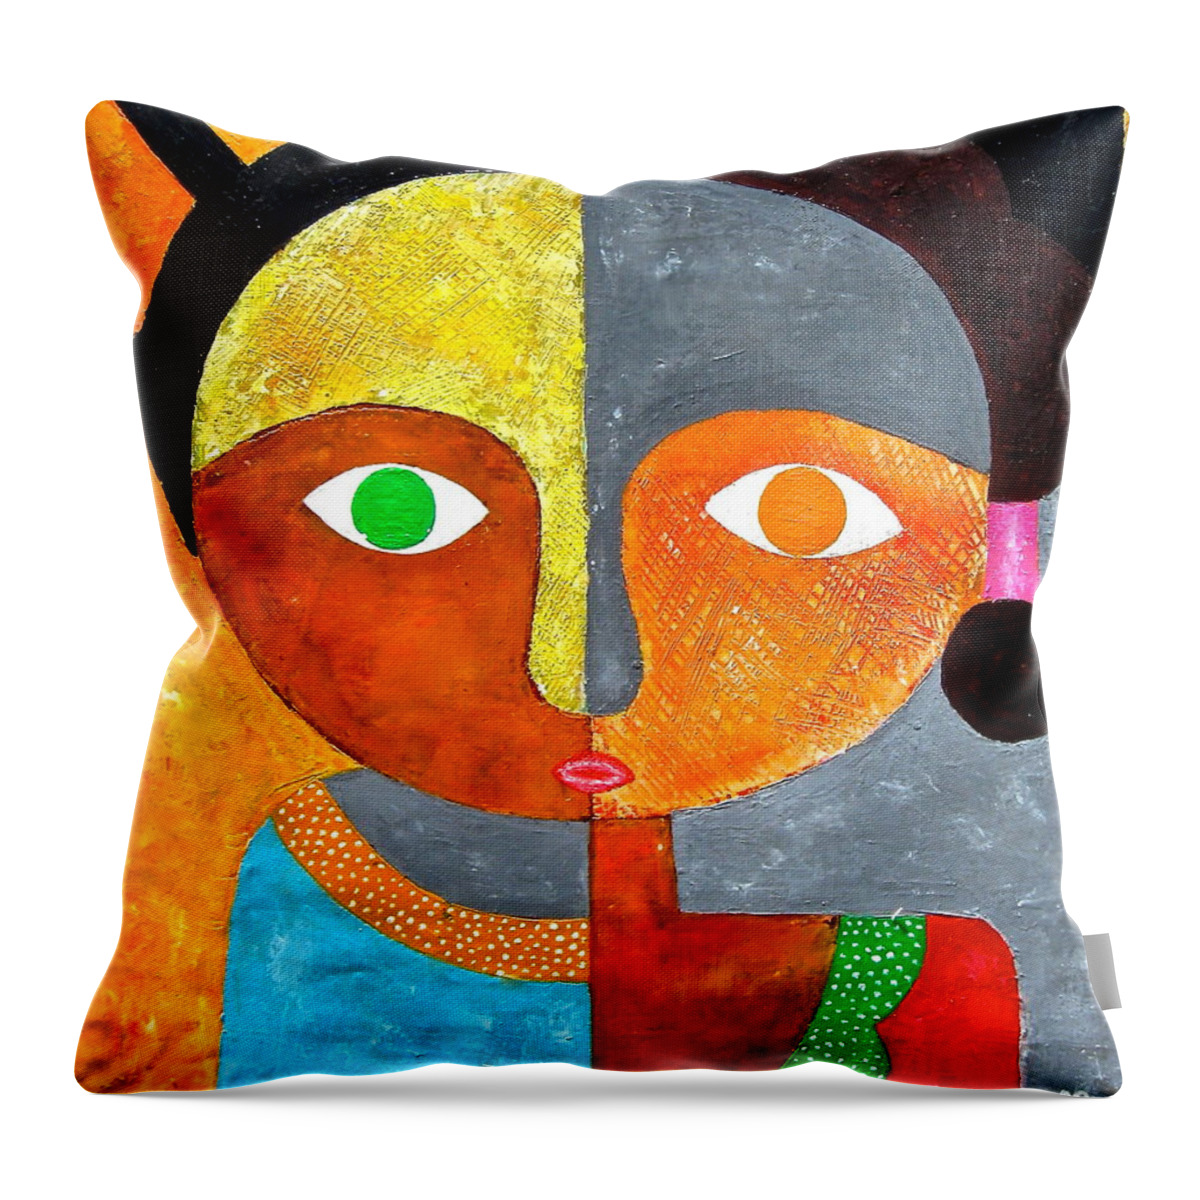 African Paintings Throw Pillow featuring the painting Face 2 by Kibunja